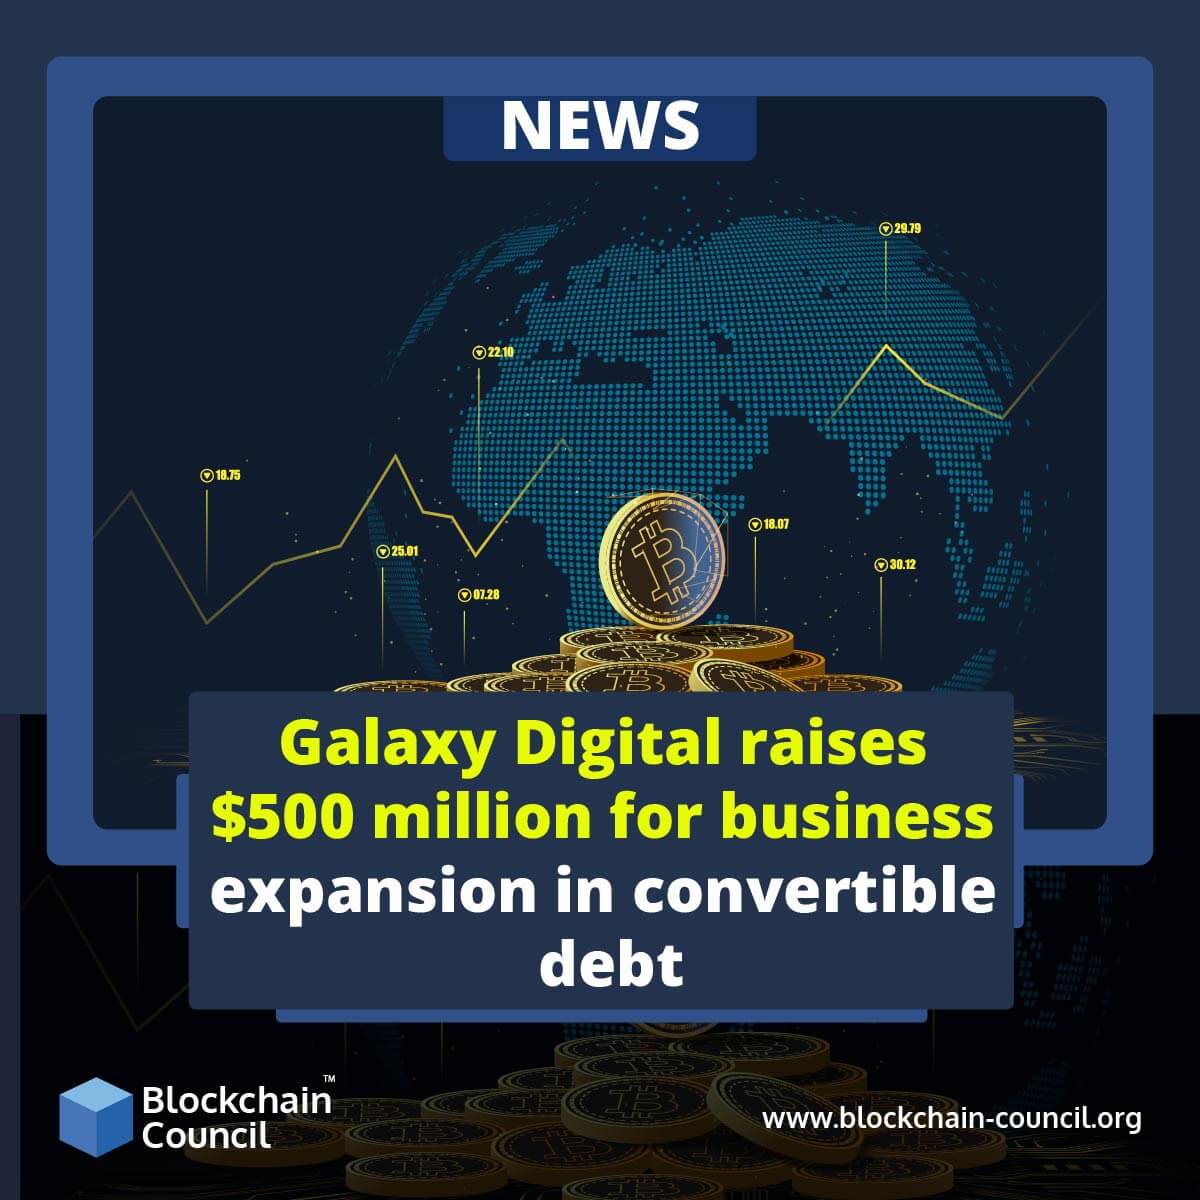 Galaxy Digital raises $500 million for business expansion in convertible debt